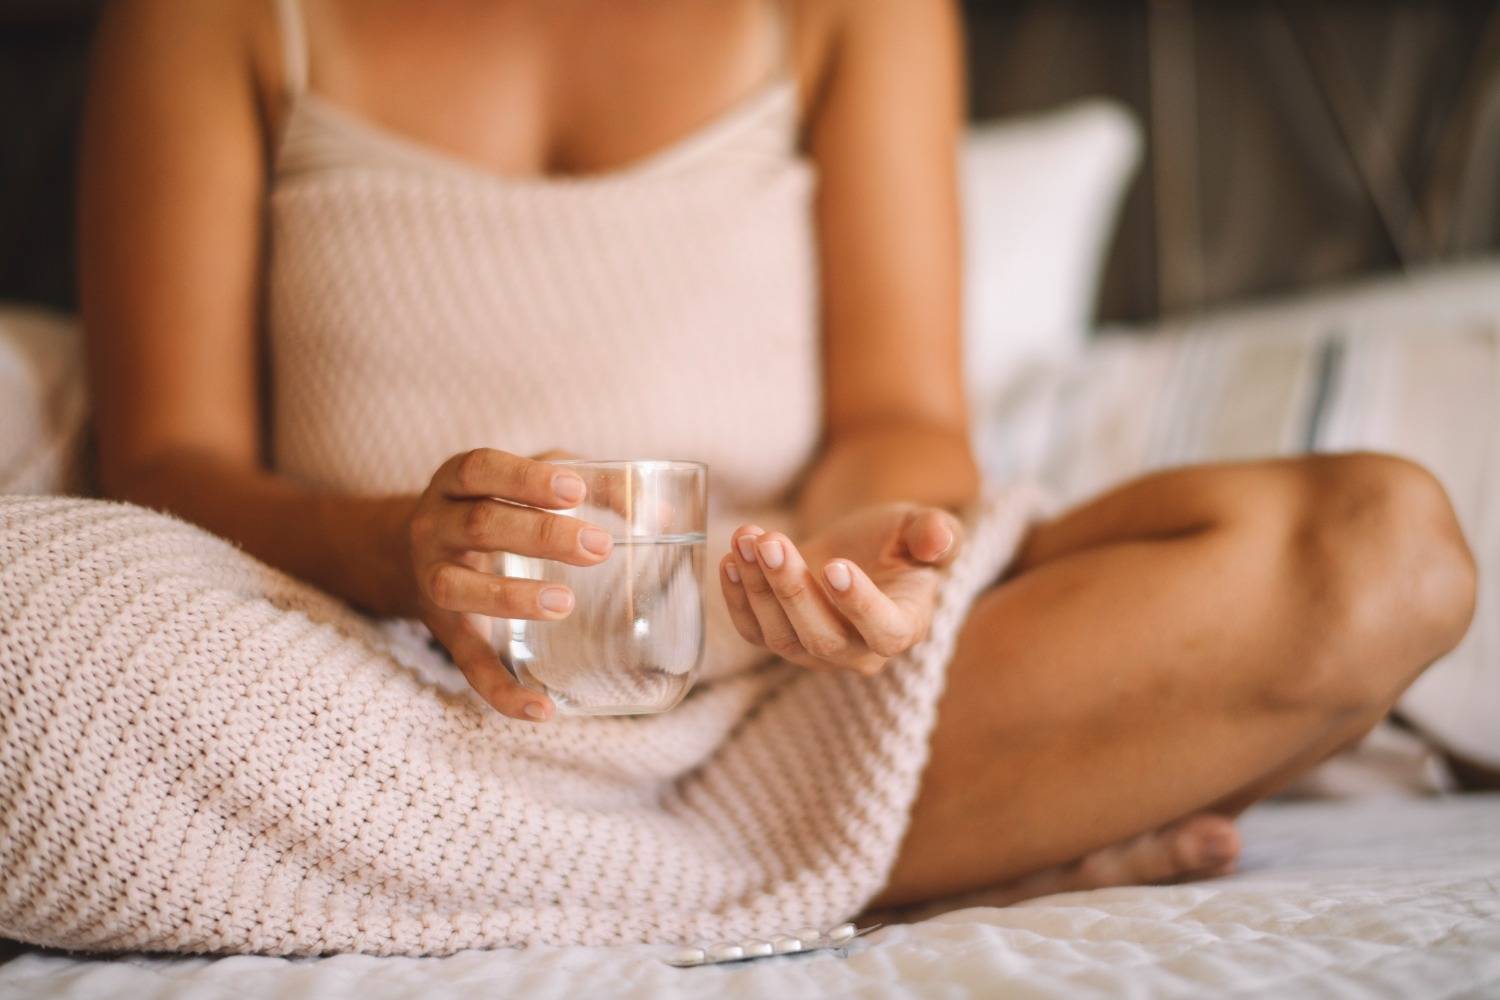 Woman in bed with glass of water and capsules in hand